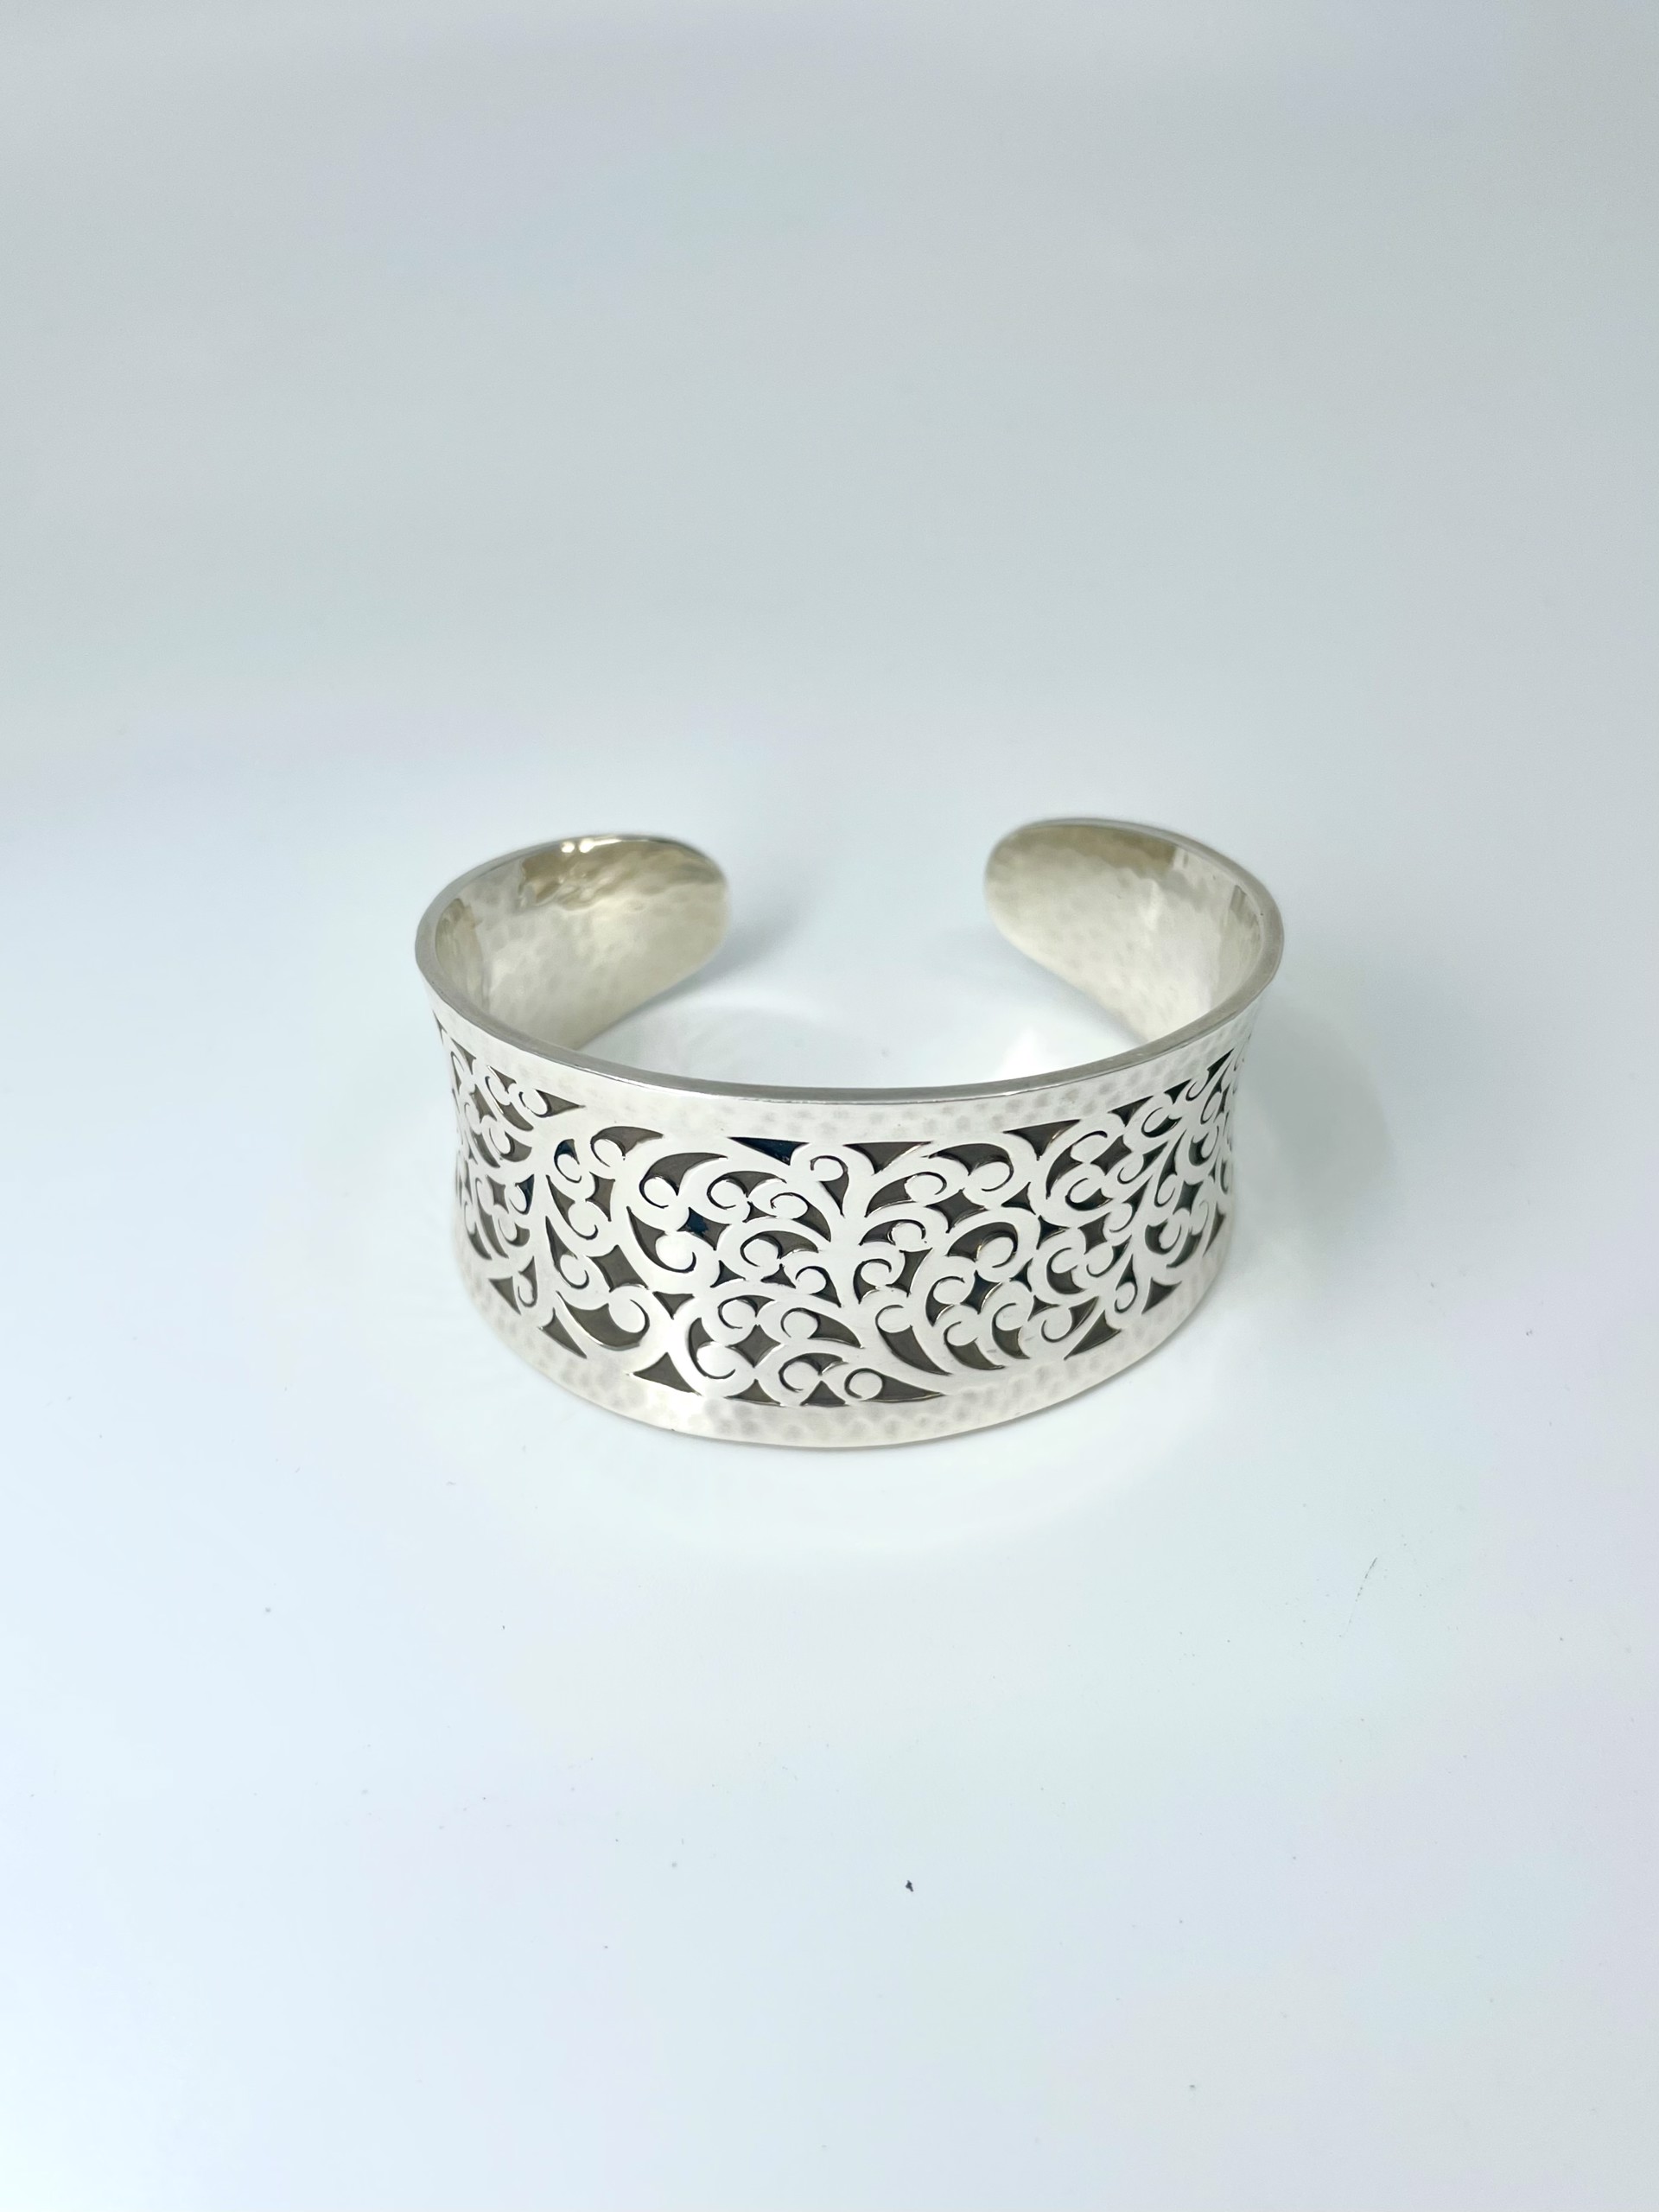 1033 Conclave Scroll Graduated Cuff Bracelet by Lois Hill